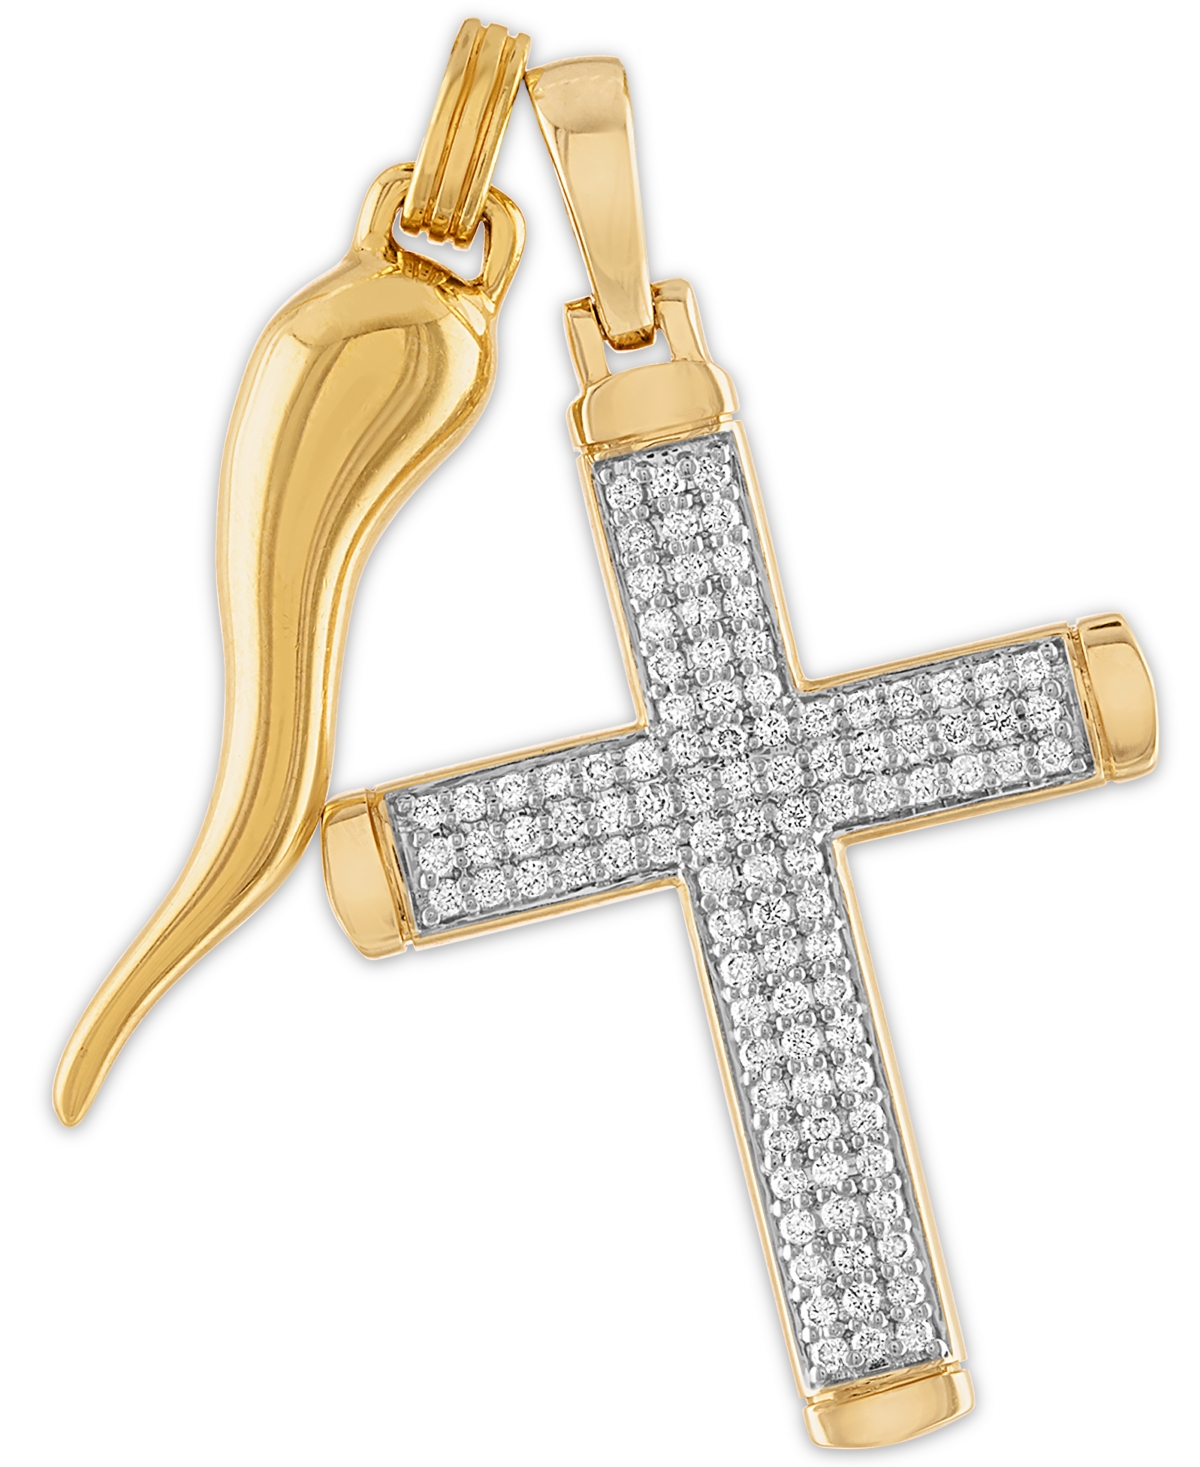 2-Pc. Set Cubic Zirconia Cross and Horn Pendants in 14k Gold-Plated Sterling Silver, Created for Macy's - Gold Over Silver